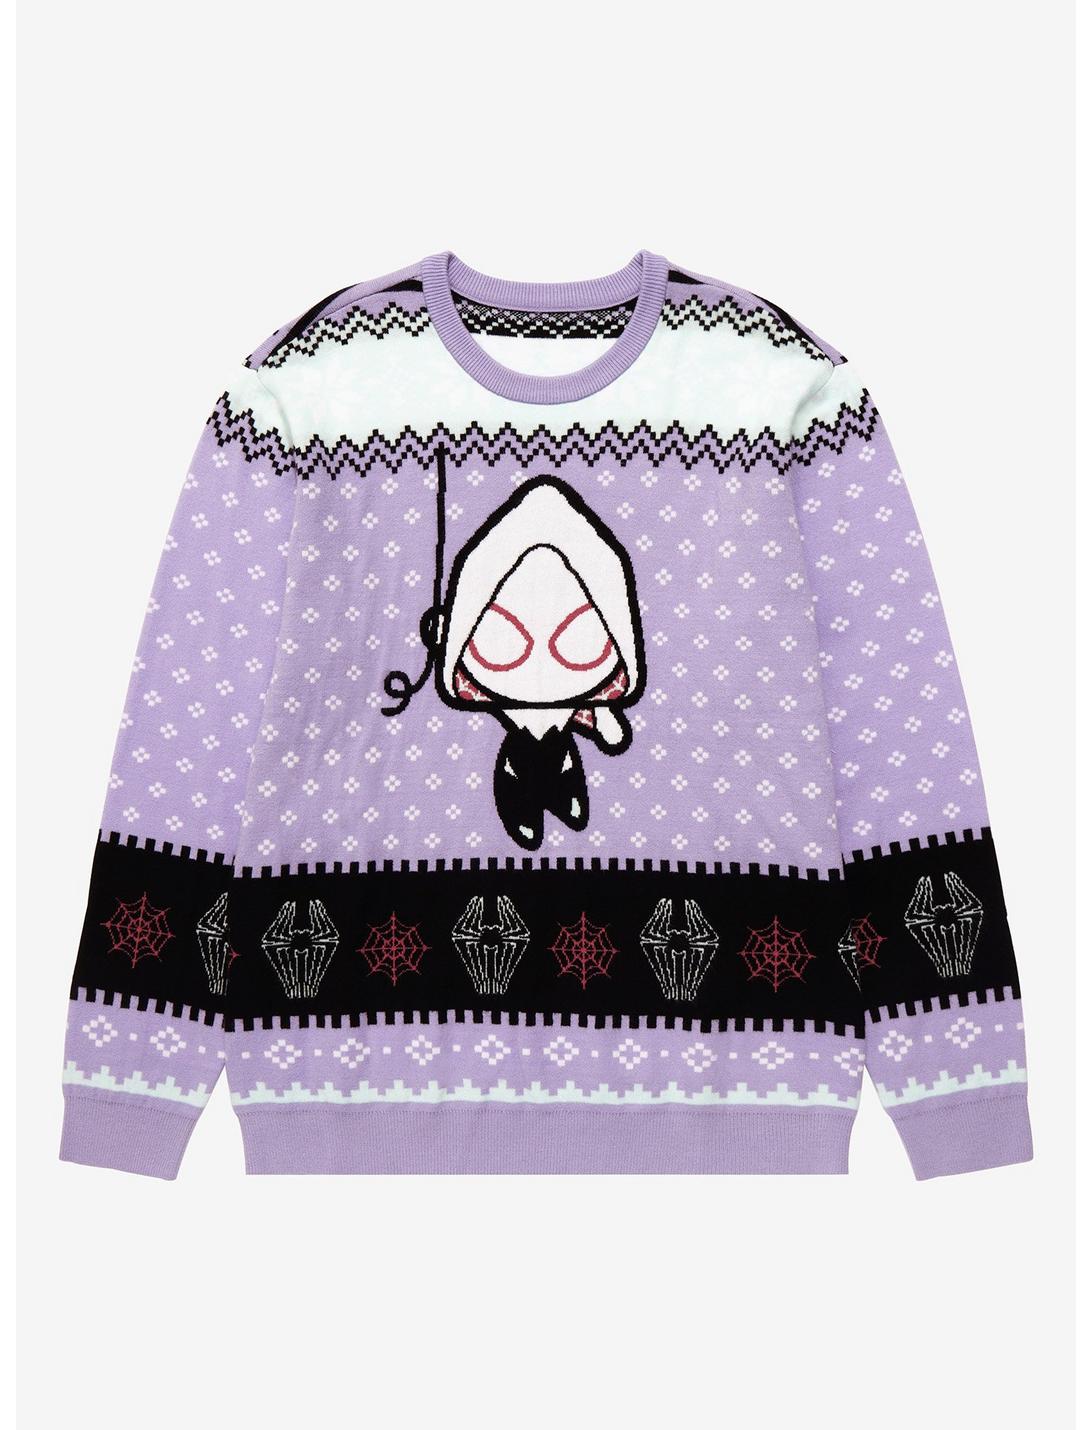 Marvel Spider-Man: Into the Spider-Verse Spider-Gwen Holiday Sweater - BoxLunch Exclusive, LAVENDER, hi-res